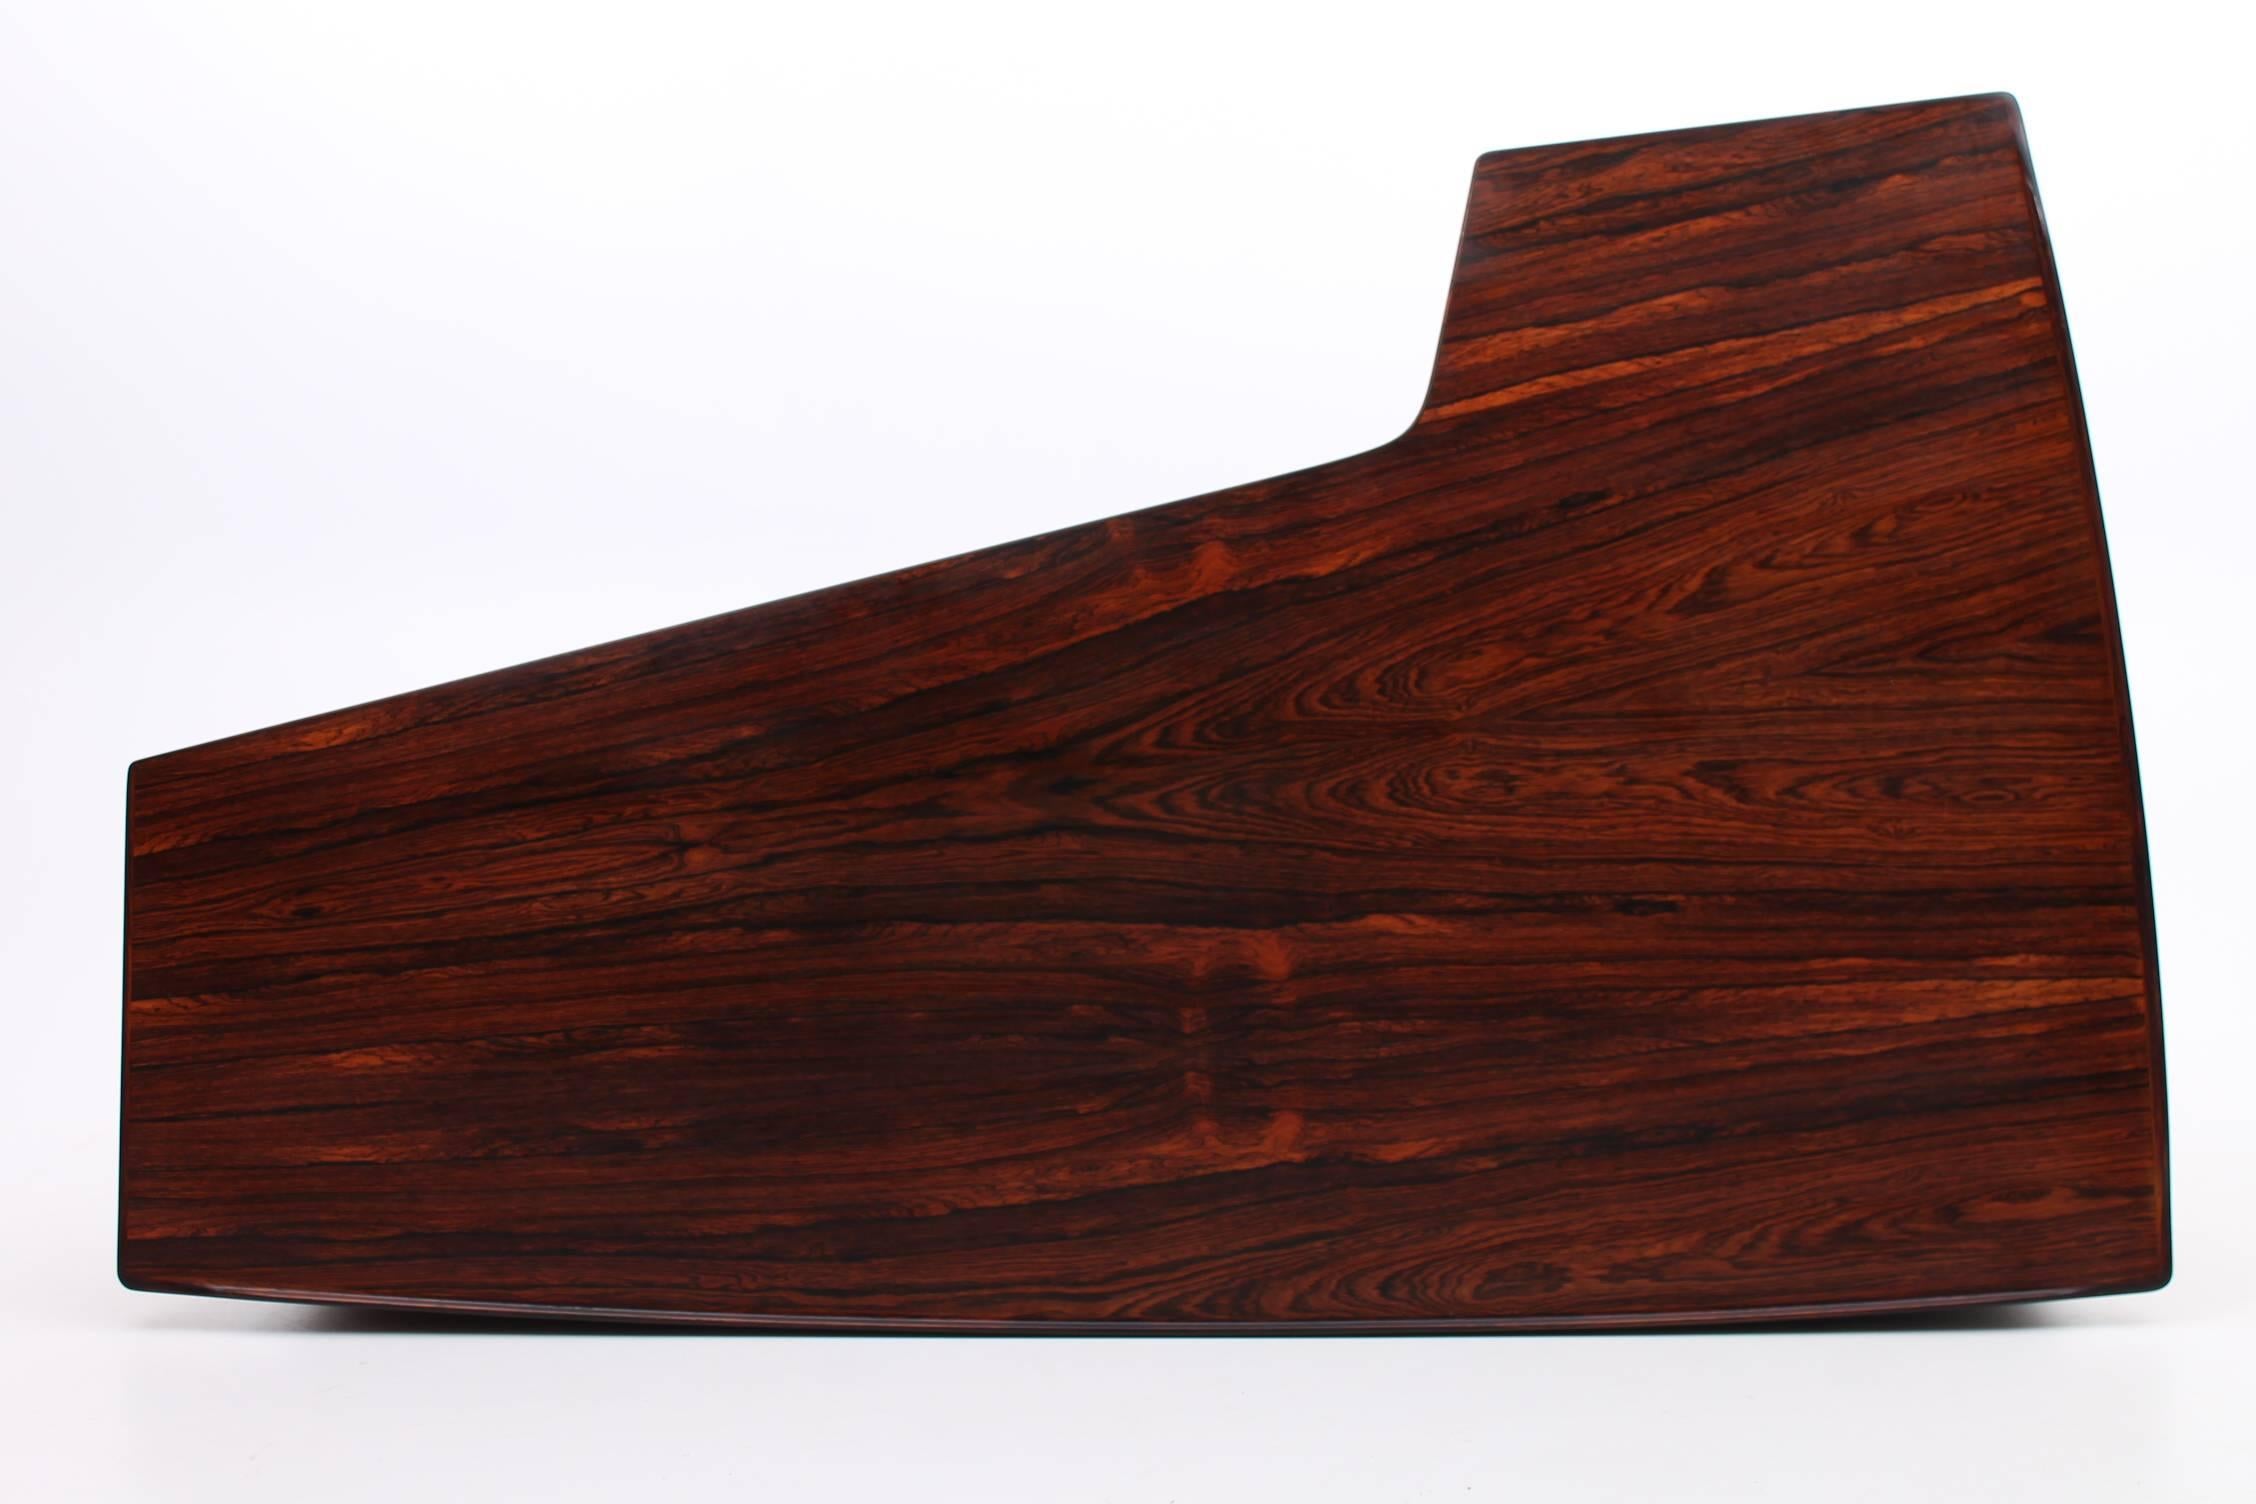 Amazing rosewood desk by Peter Lovig Nielsen for Hedendsted Møbelfabrik circa 1956. The L-shaped design makes the desk an architecturally dramatic piece while the rosewood gives it an elegant finish. There is a small lip around the desk so you don’t